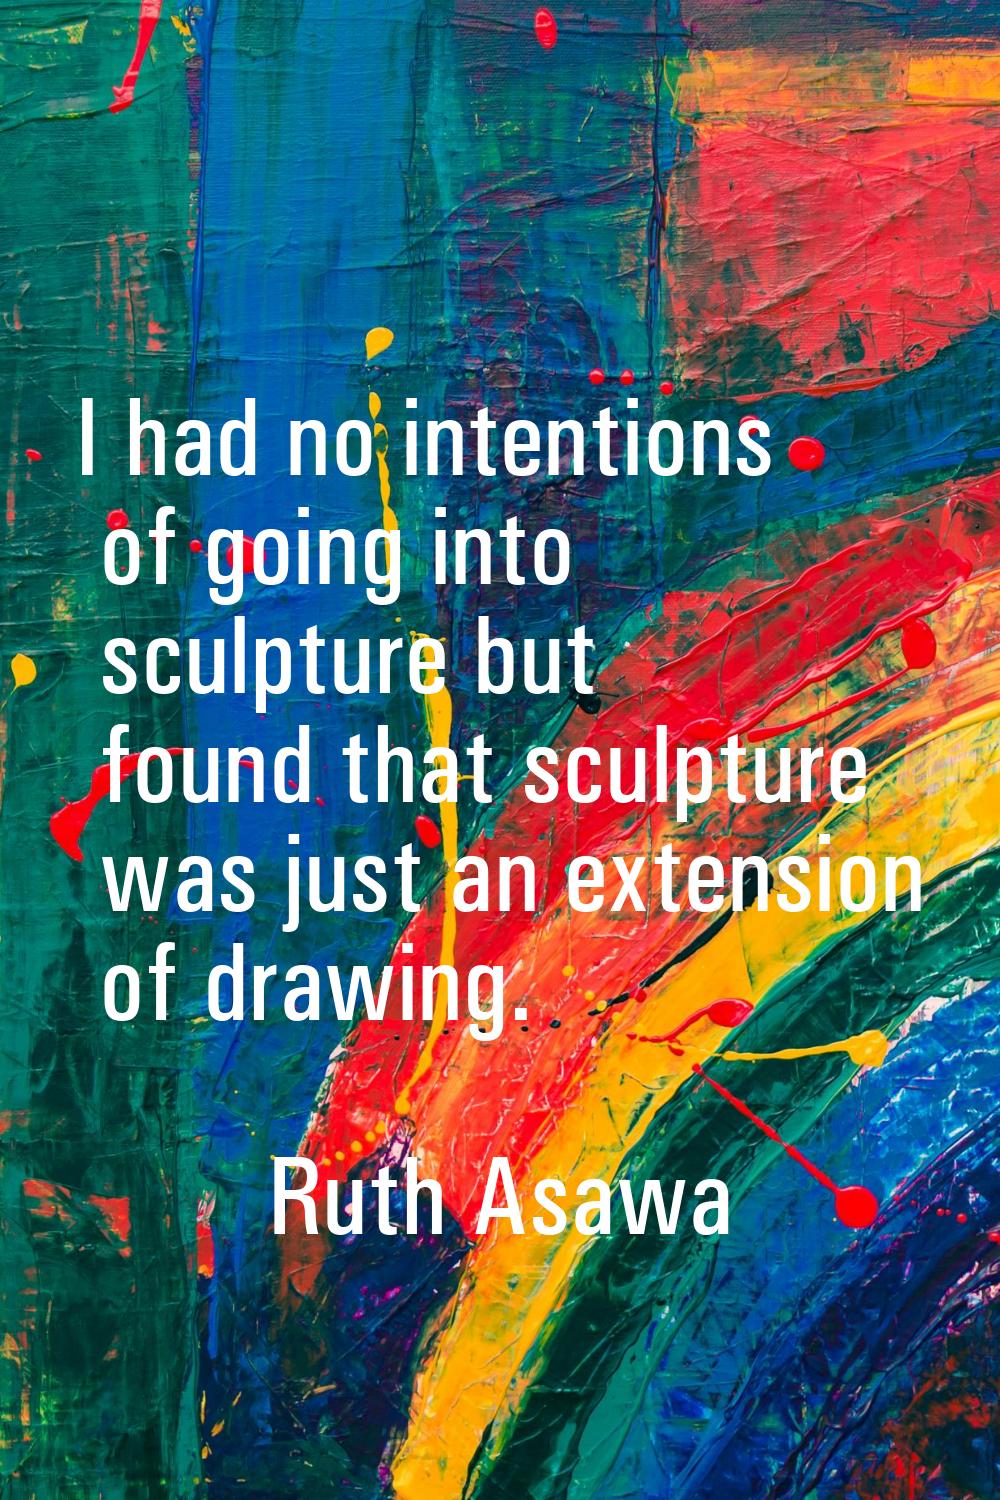 I had no intentions of going into sculpture but found that sculpture was just an extension of drawi